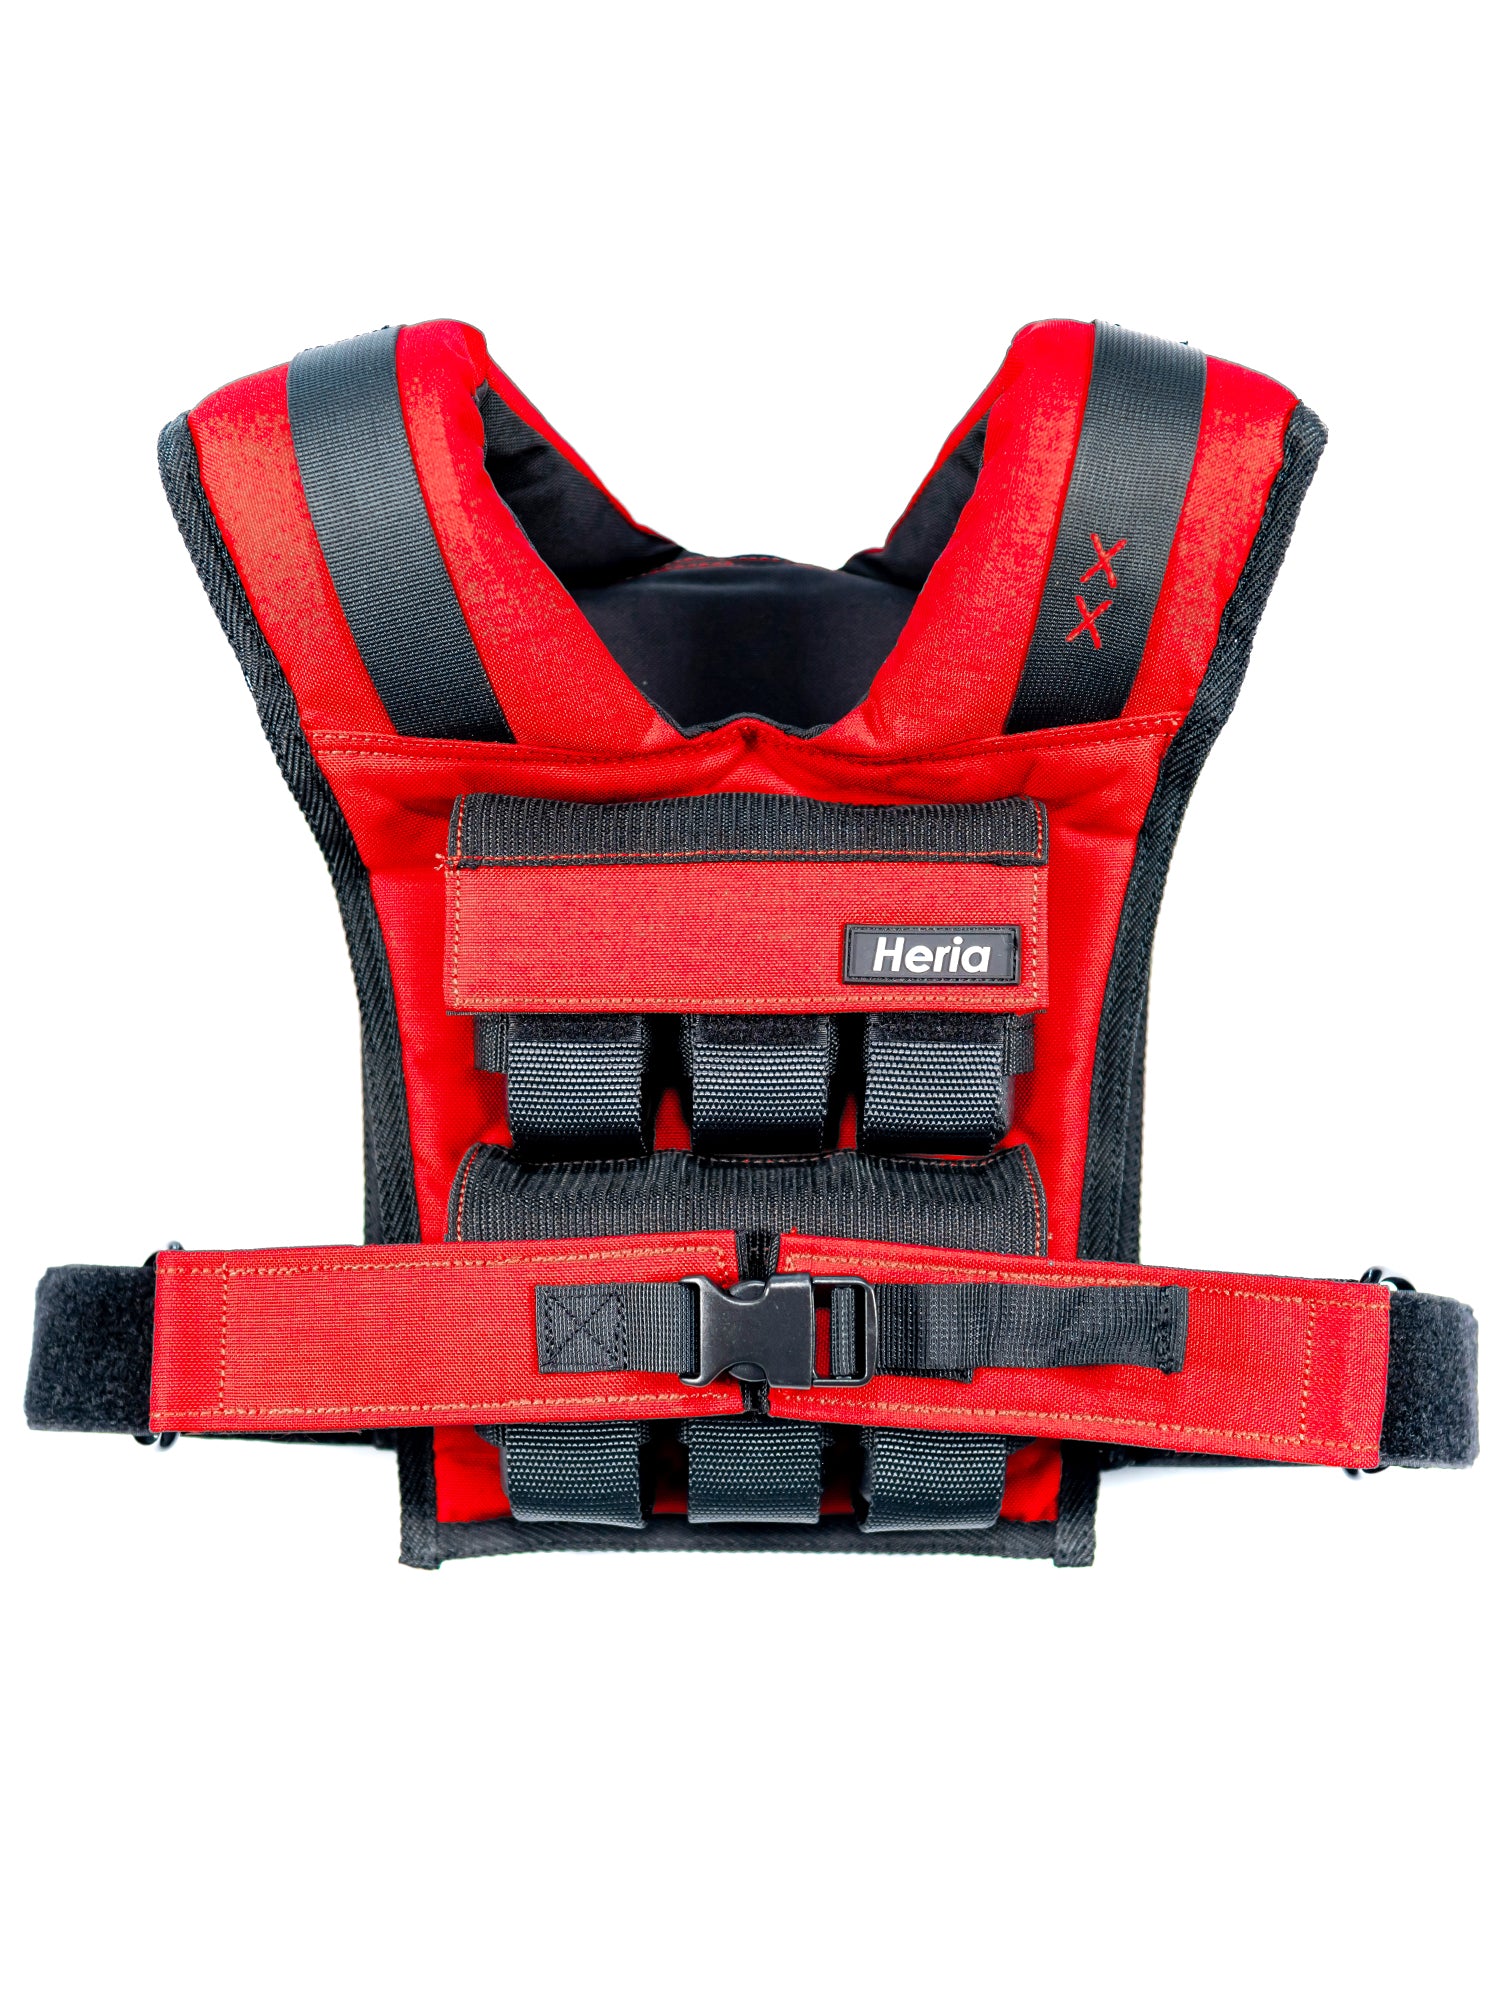 28LB Weight Vest - Red (4408268783658)